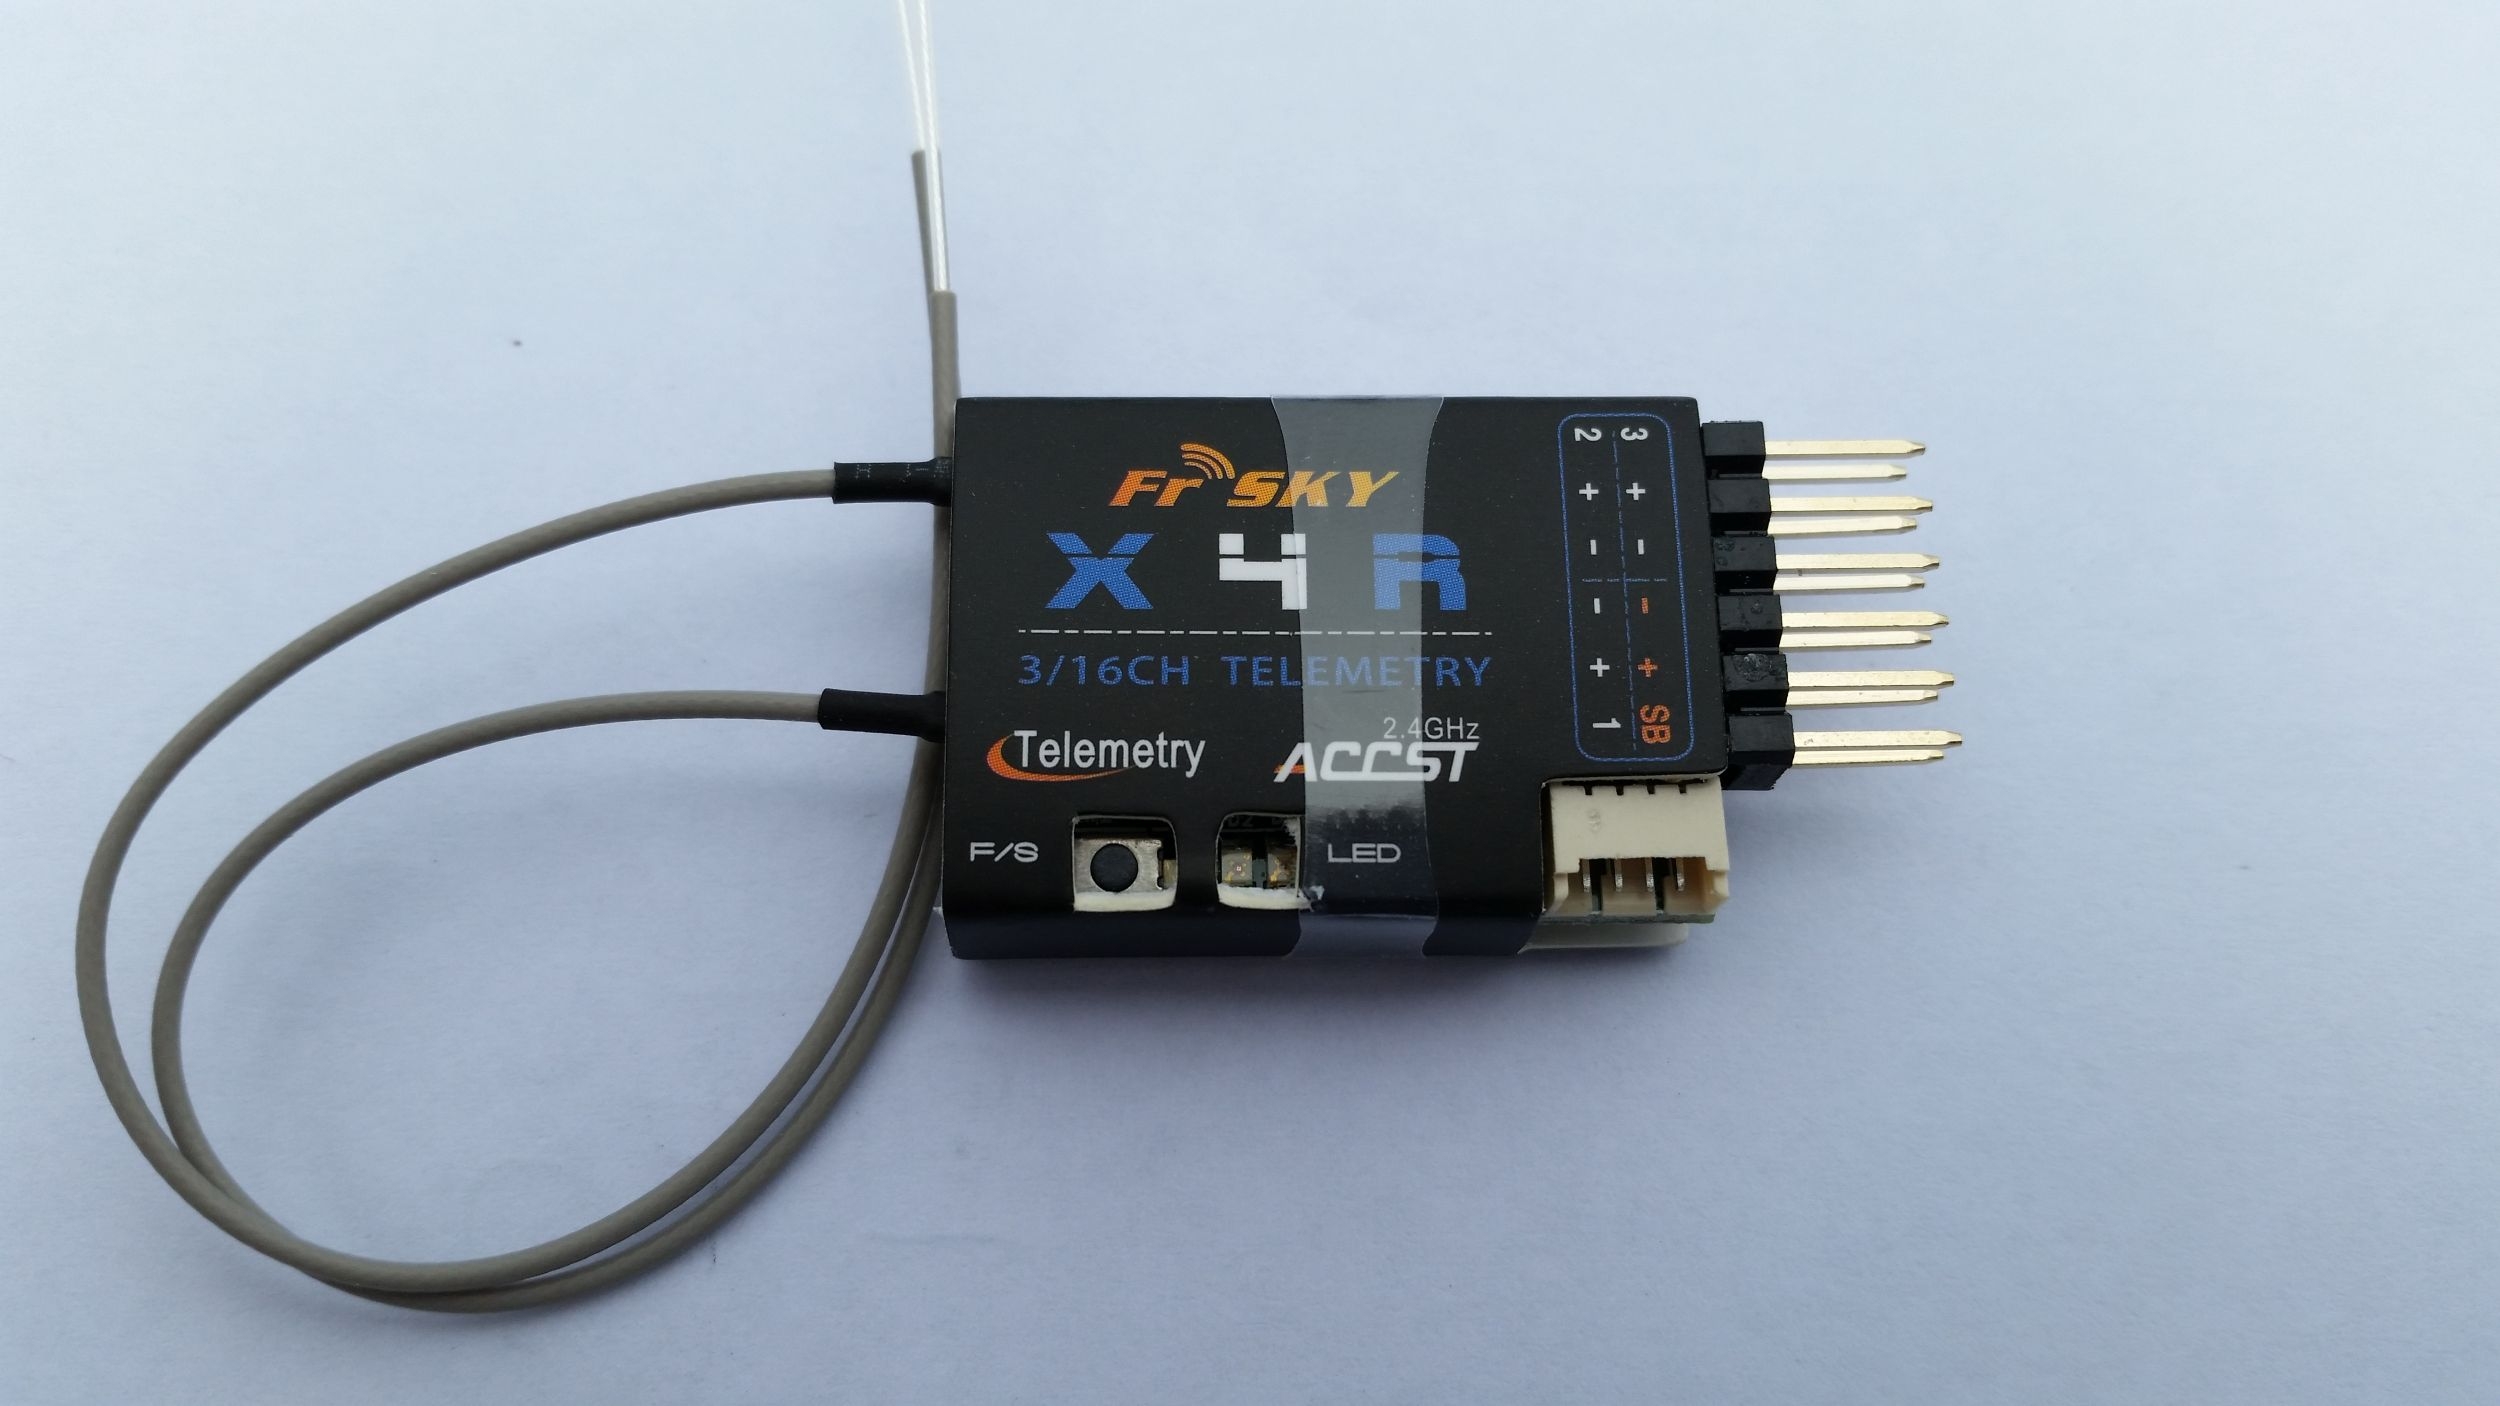 Flash X4R SB receiver with the new PPM and S.BUS Firmware